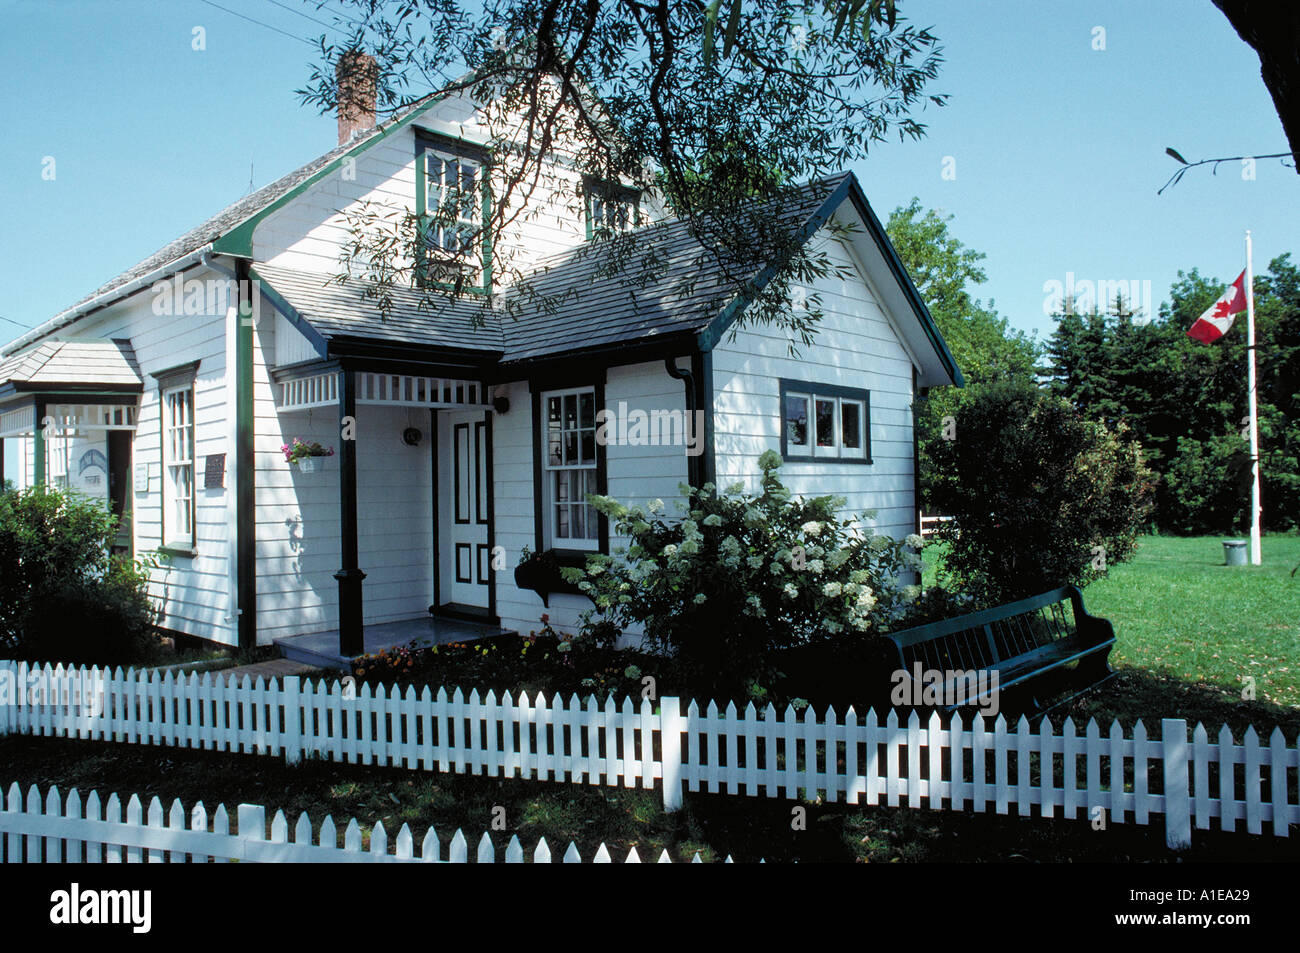 Lucy Maud Montgomery home PEI extensive collection of PEI images available  Stock Photo